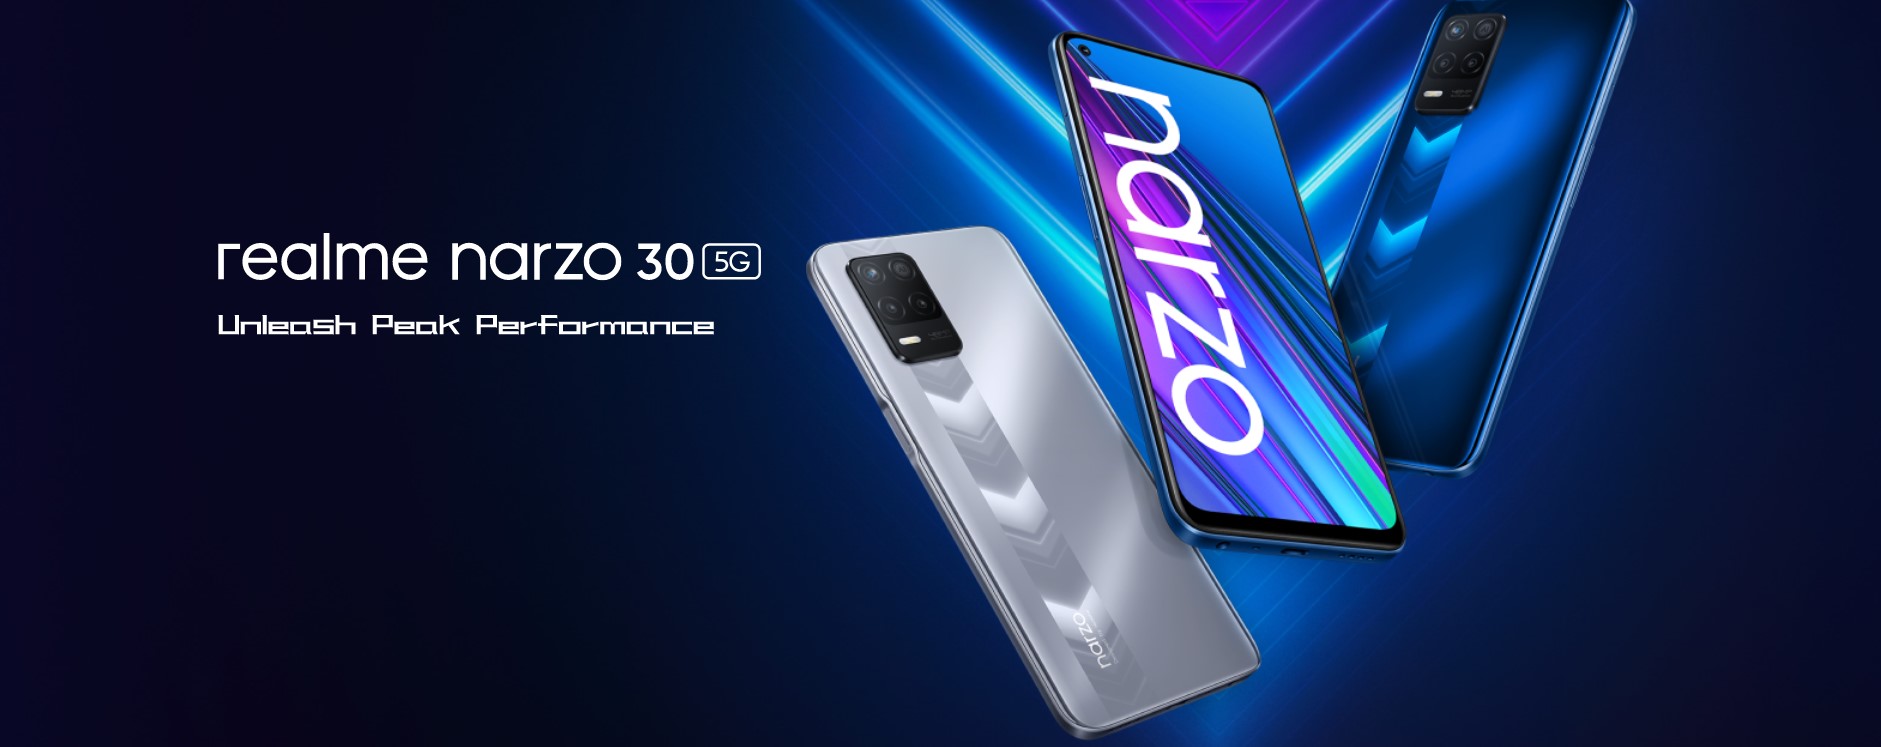 Realme Narzo 30 5G - Best 5G Phone in India Under Rs 20000